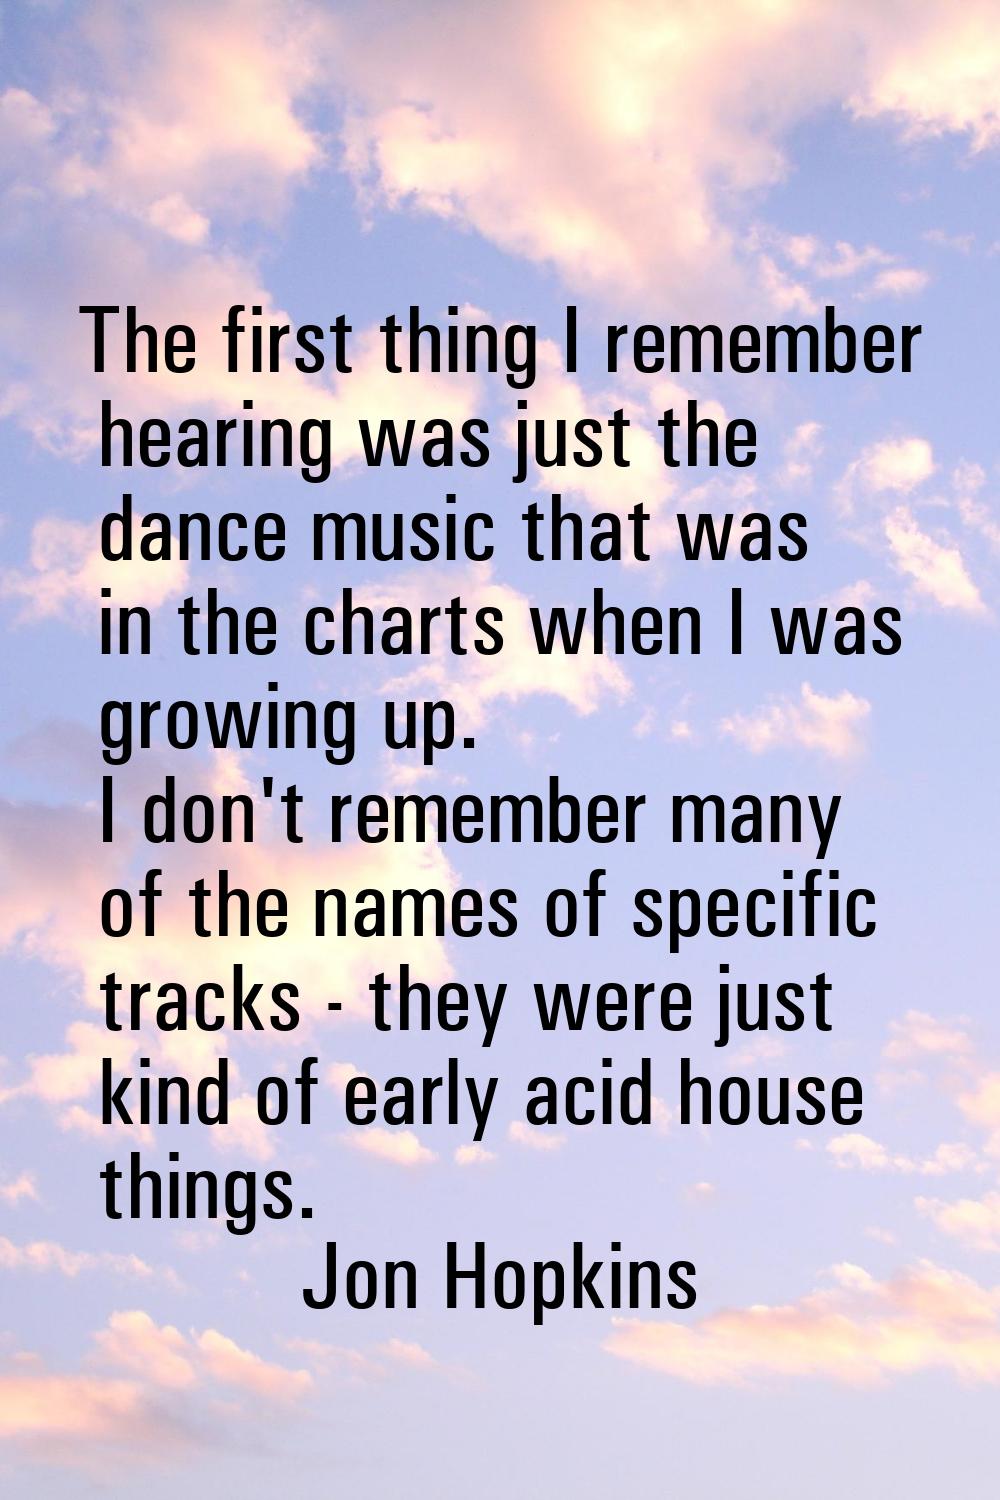 The first thing I remember hearing was just the dance music that was in the charts when I was growi